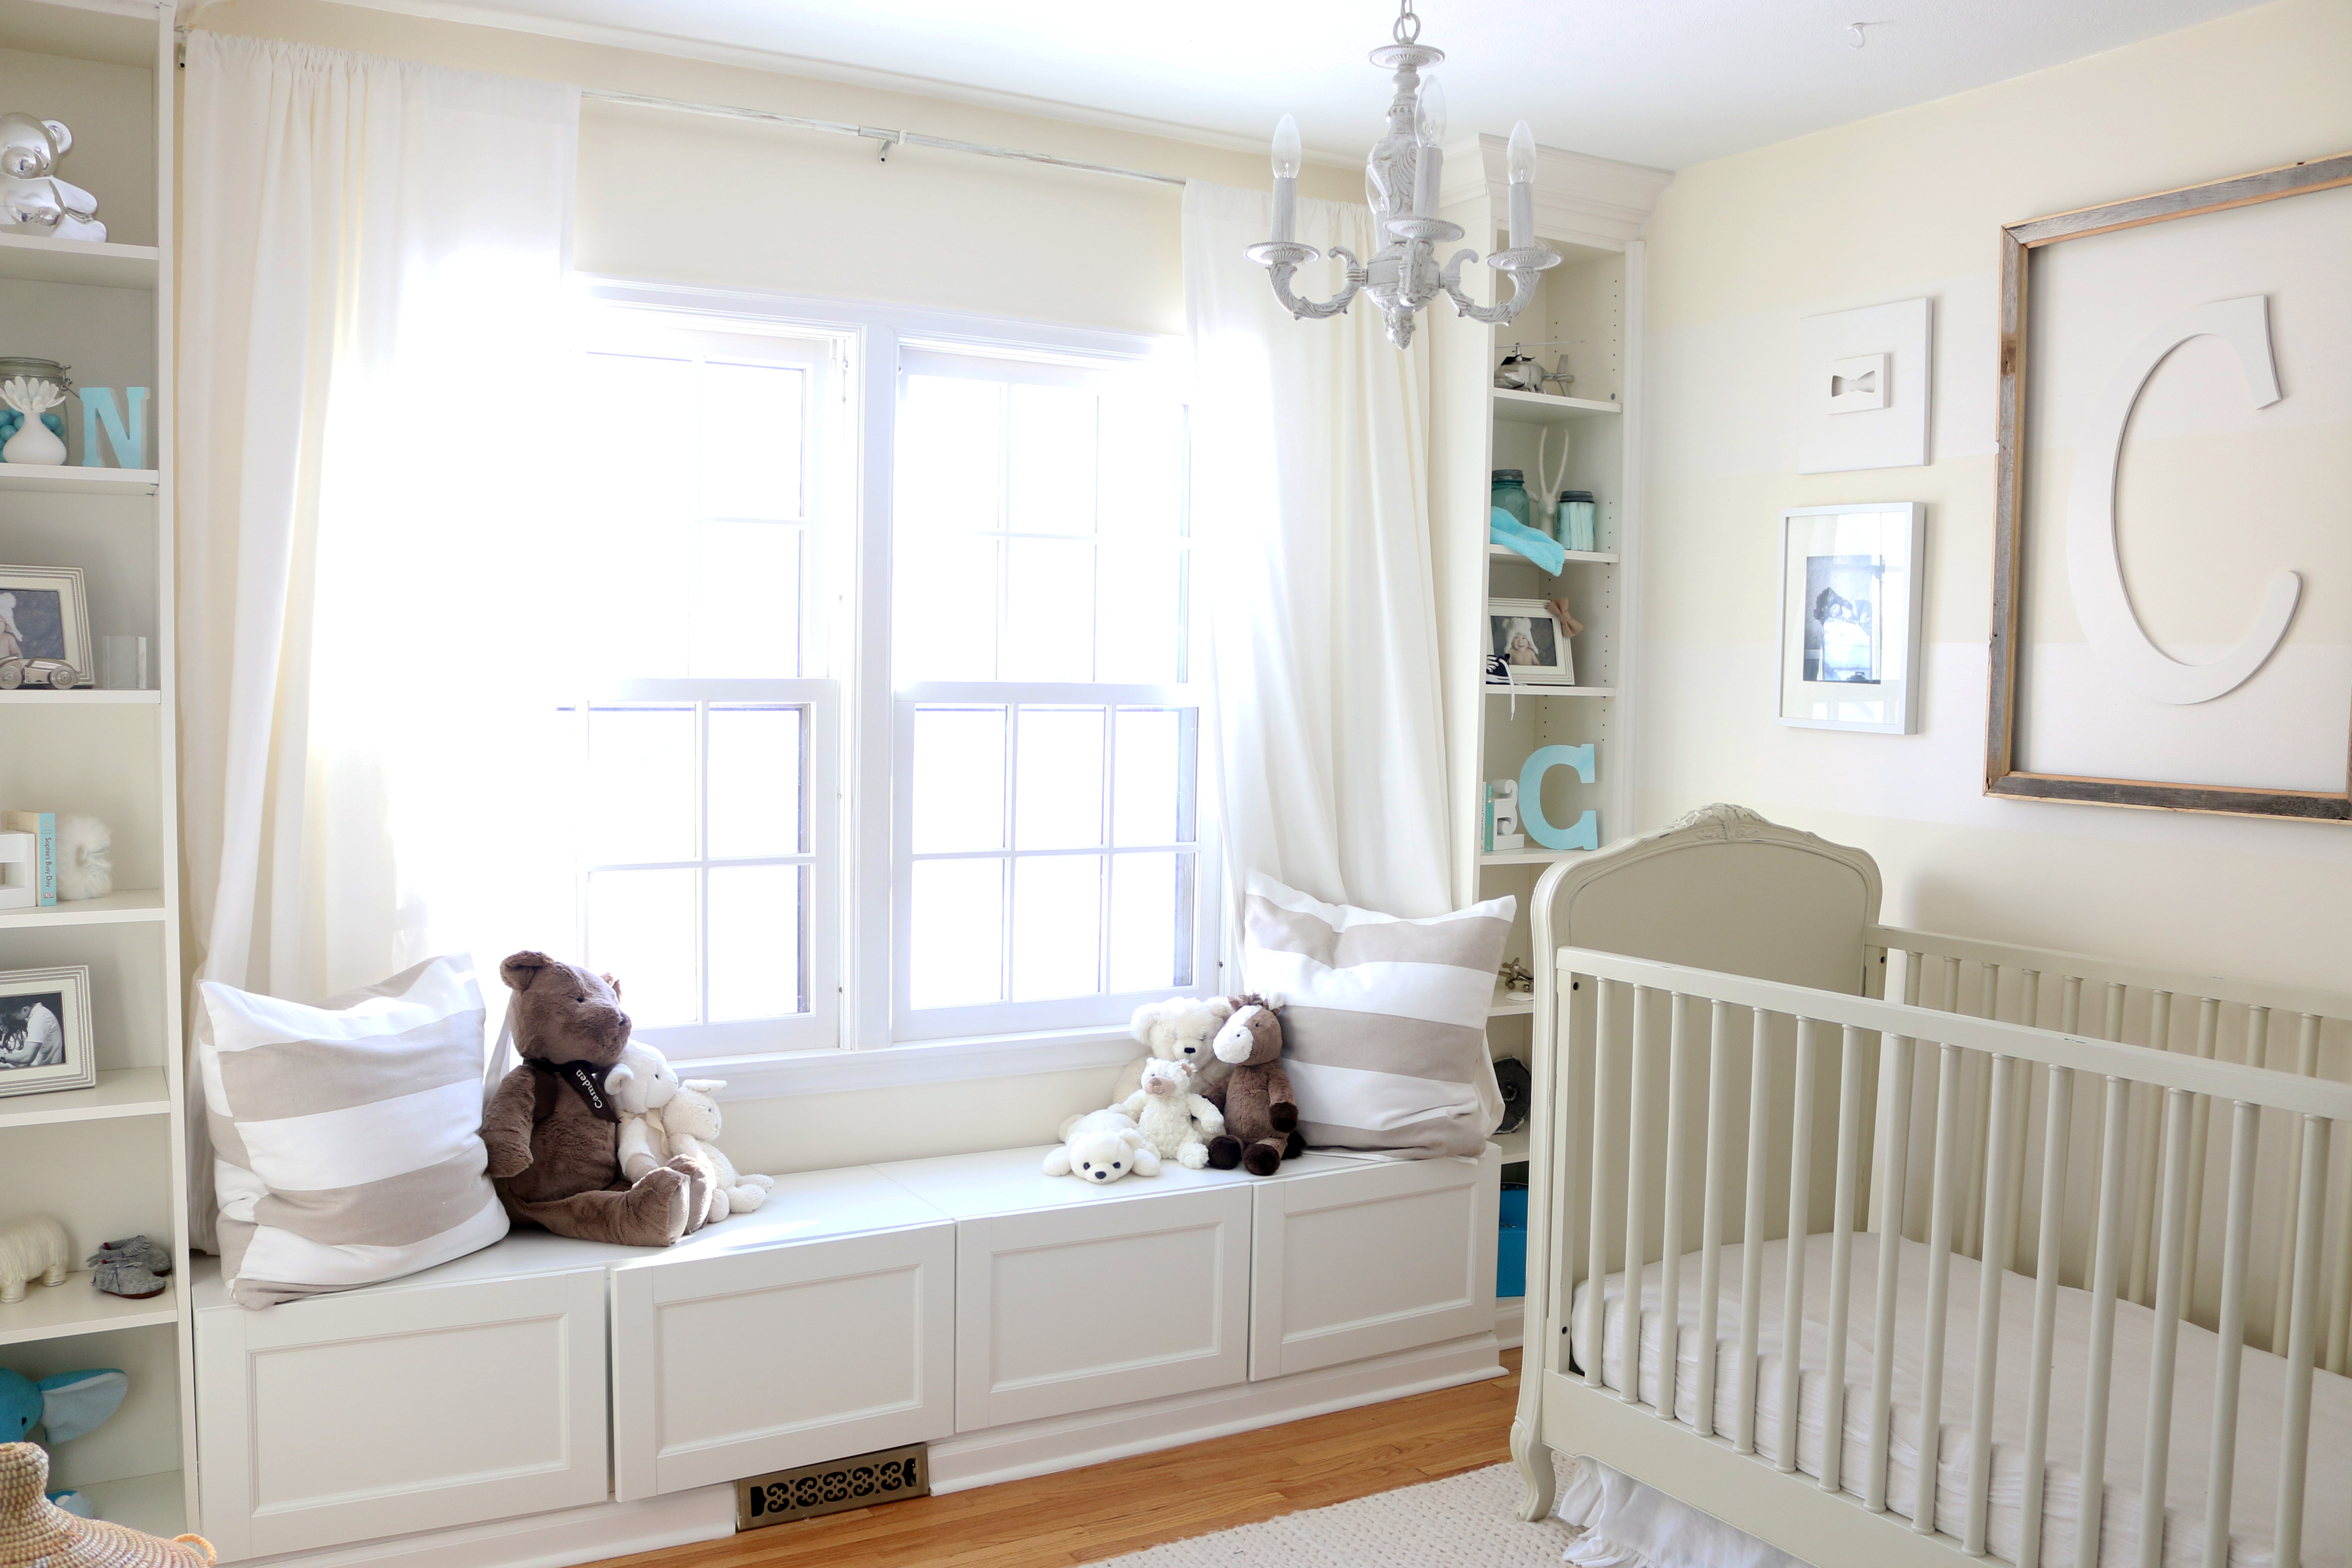 Window Seat in this Cream and White Nursery